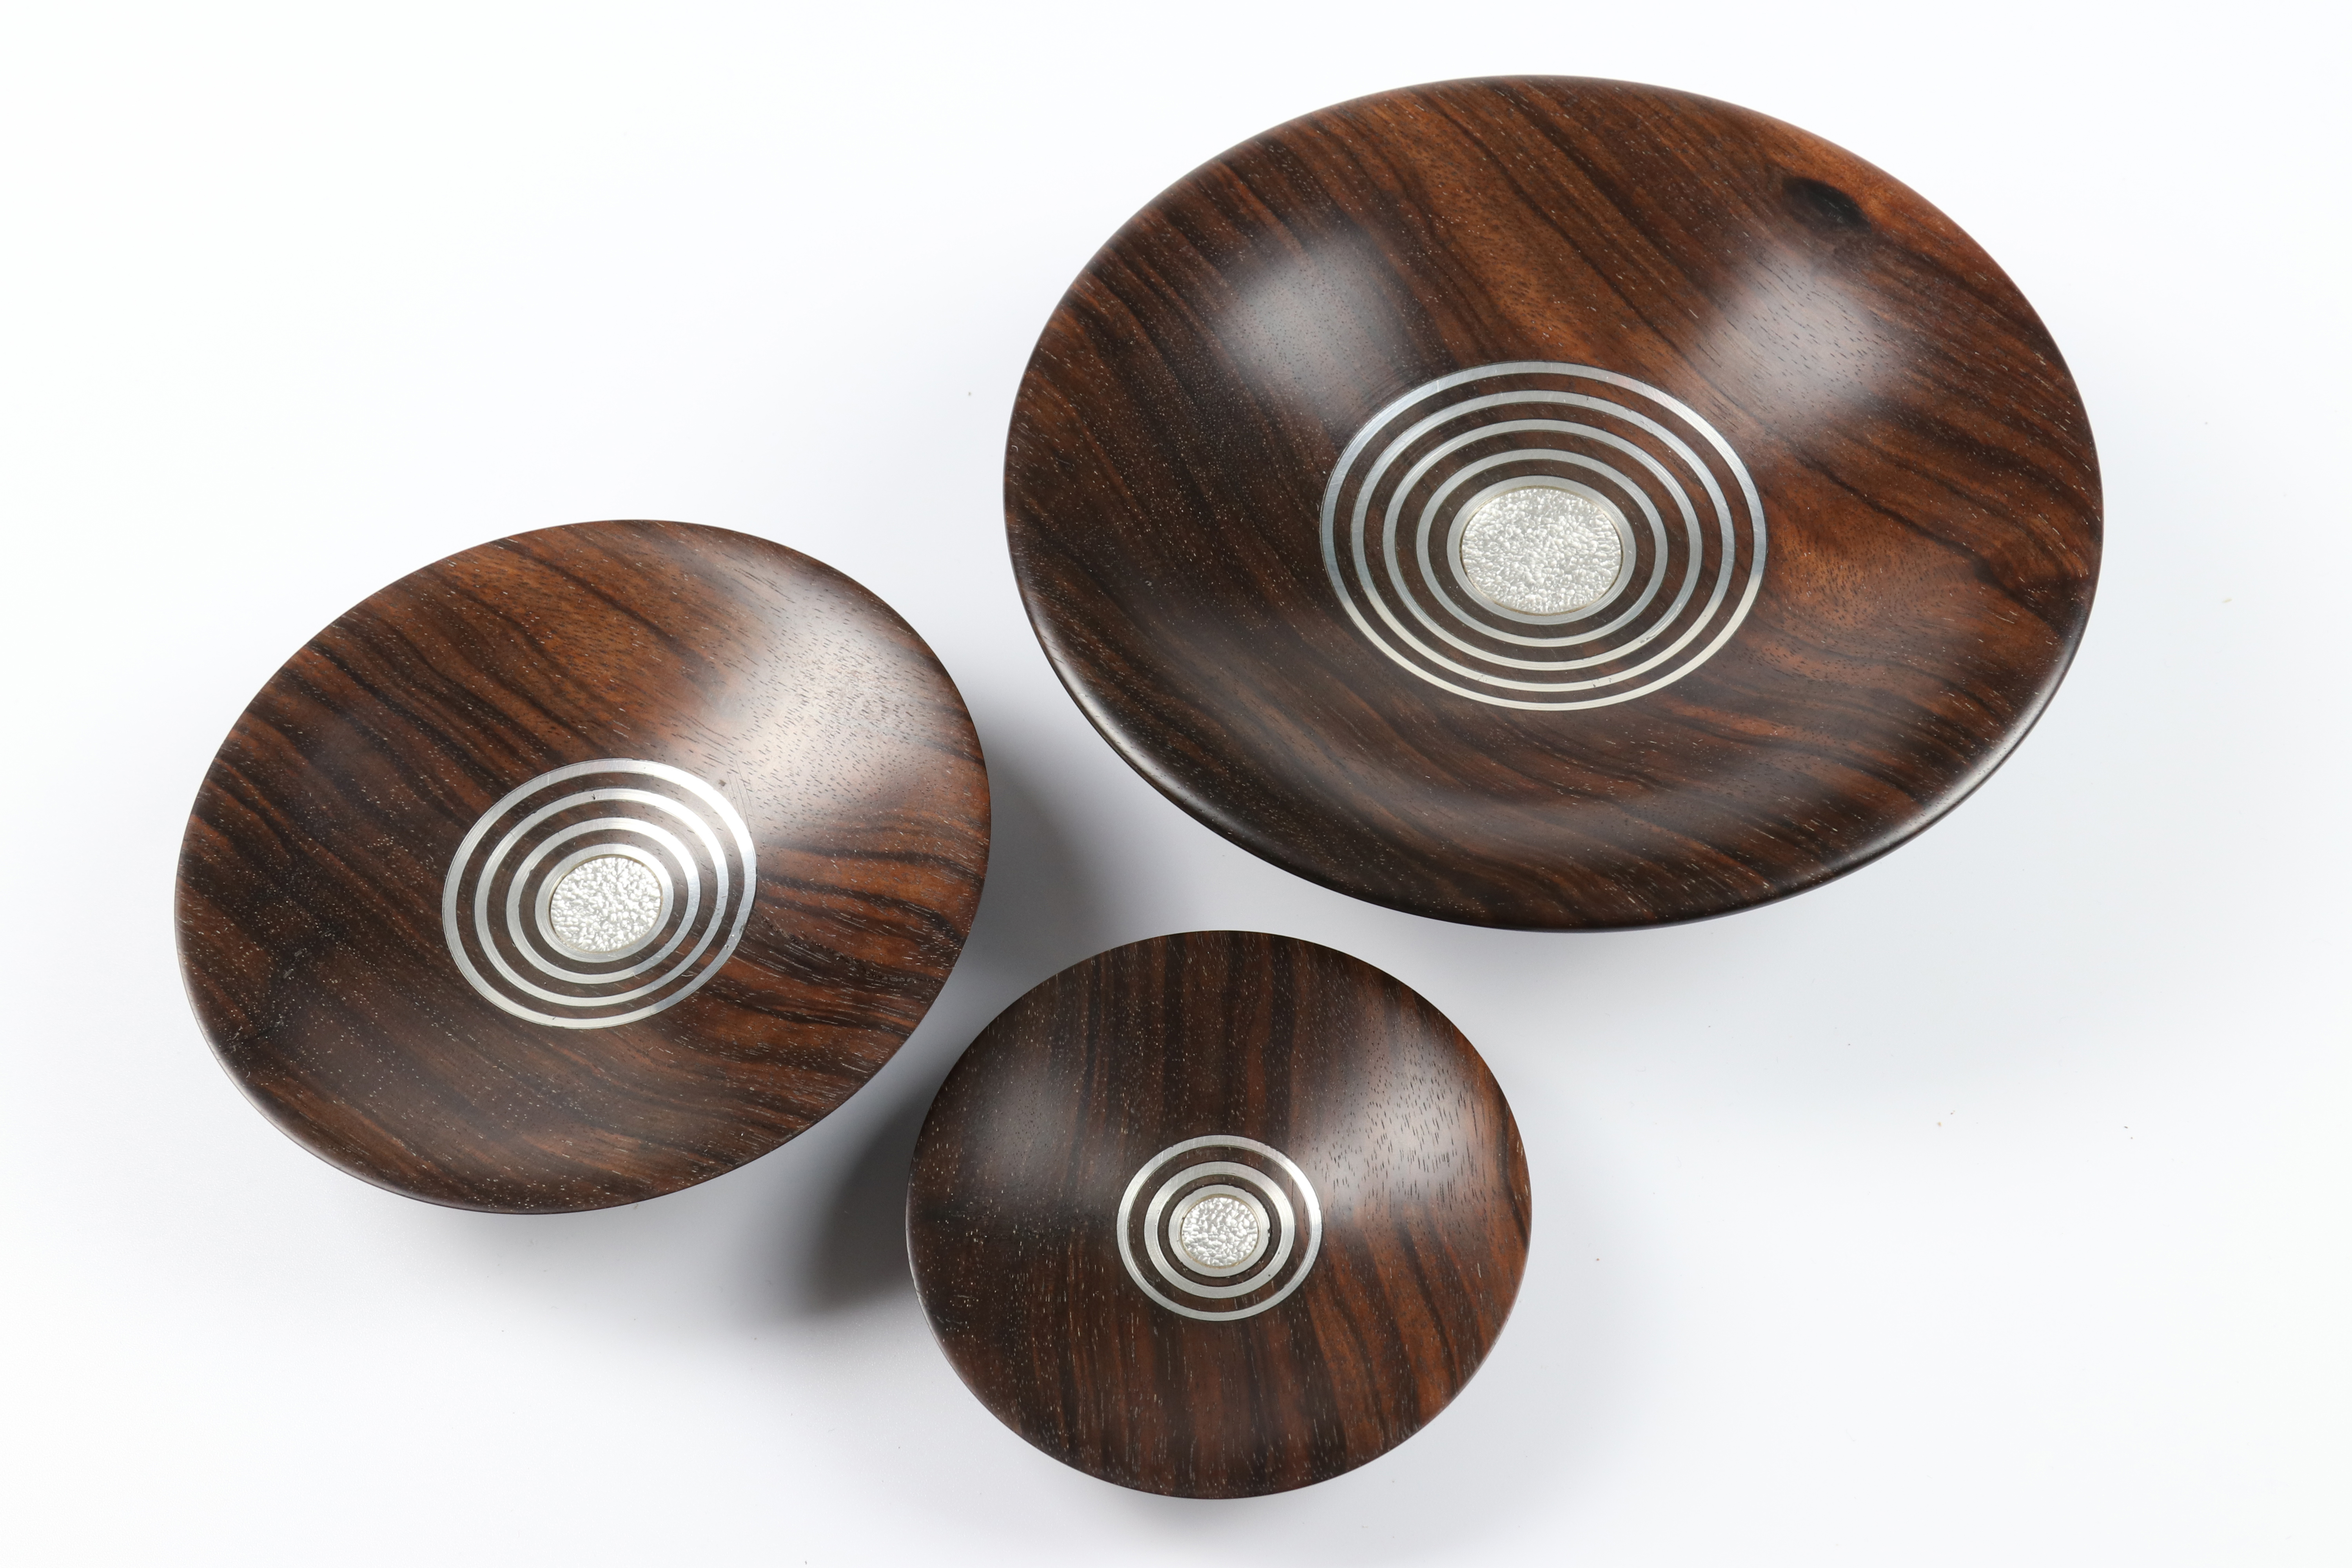 John Wessels (South Africa) striped ebony and pewter nest of three bowls 5x15, 3x13 and 2x8cm. - Image 3 of 5